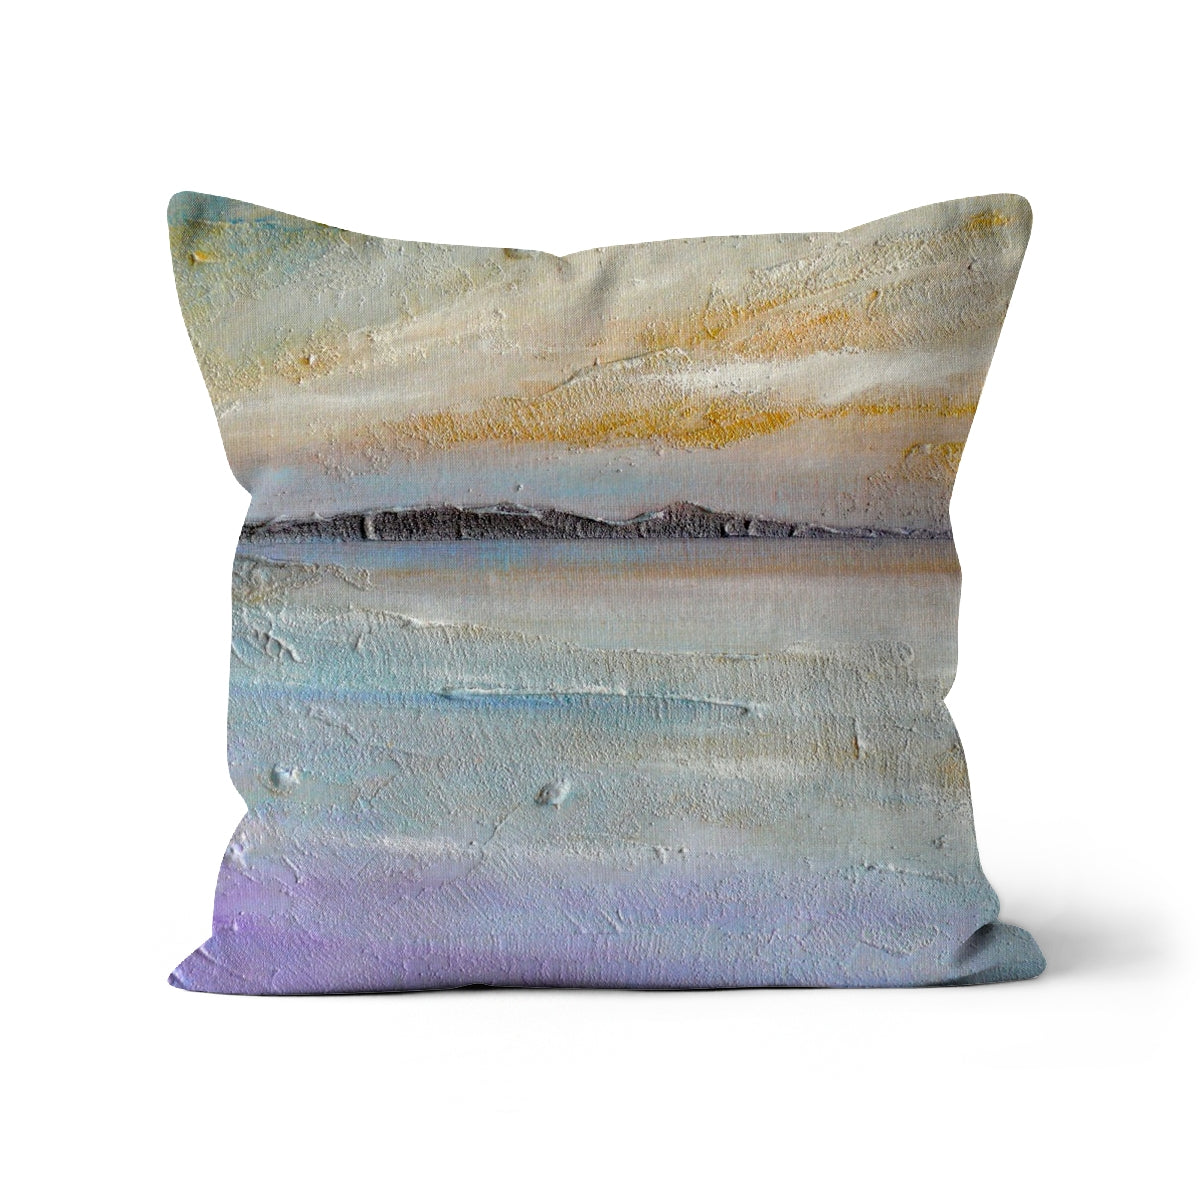 Sollas Beach South Uist Art Gifts Cushion-Cushions-Hebridean Islands Art Gallery-Linen-24"x24"-Paintings, Prints, Homeware, Art Gifts From Scotland By Scottish Artist Kevin Hunter